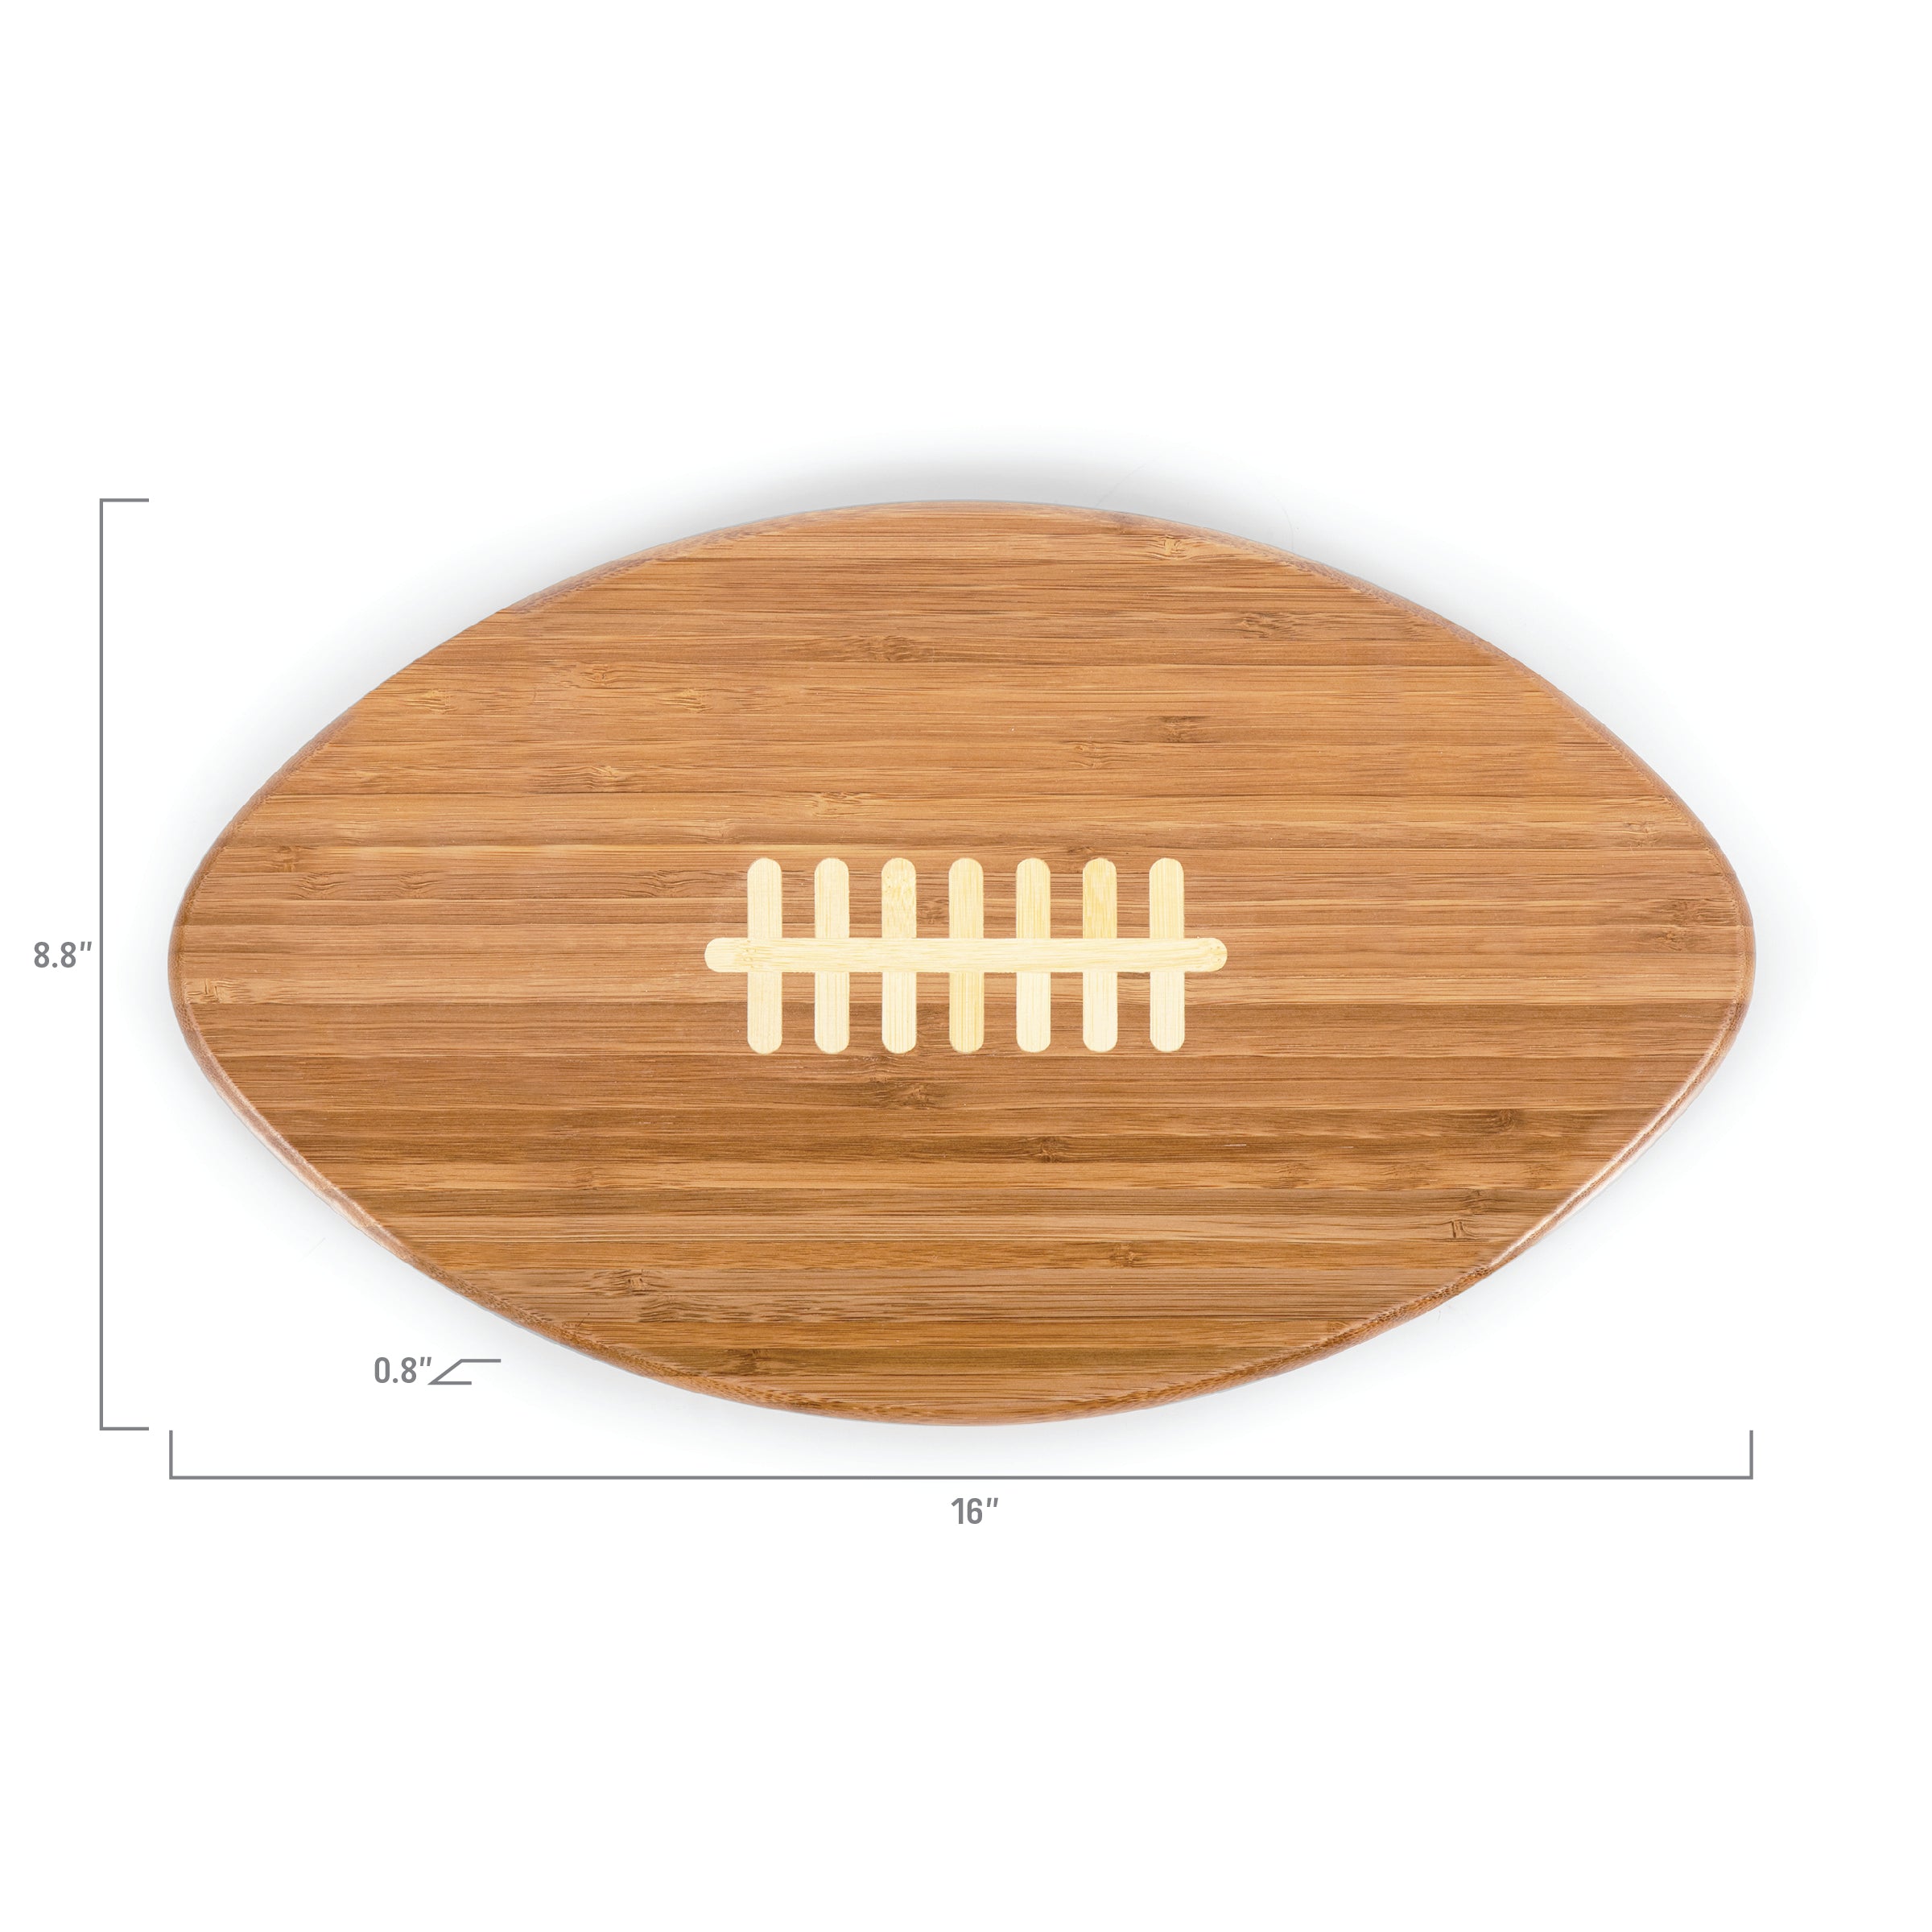 Tennessee Titans - Touchdown! Football Cutting Board & Serving Tray